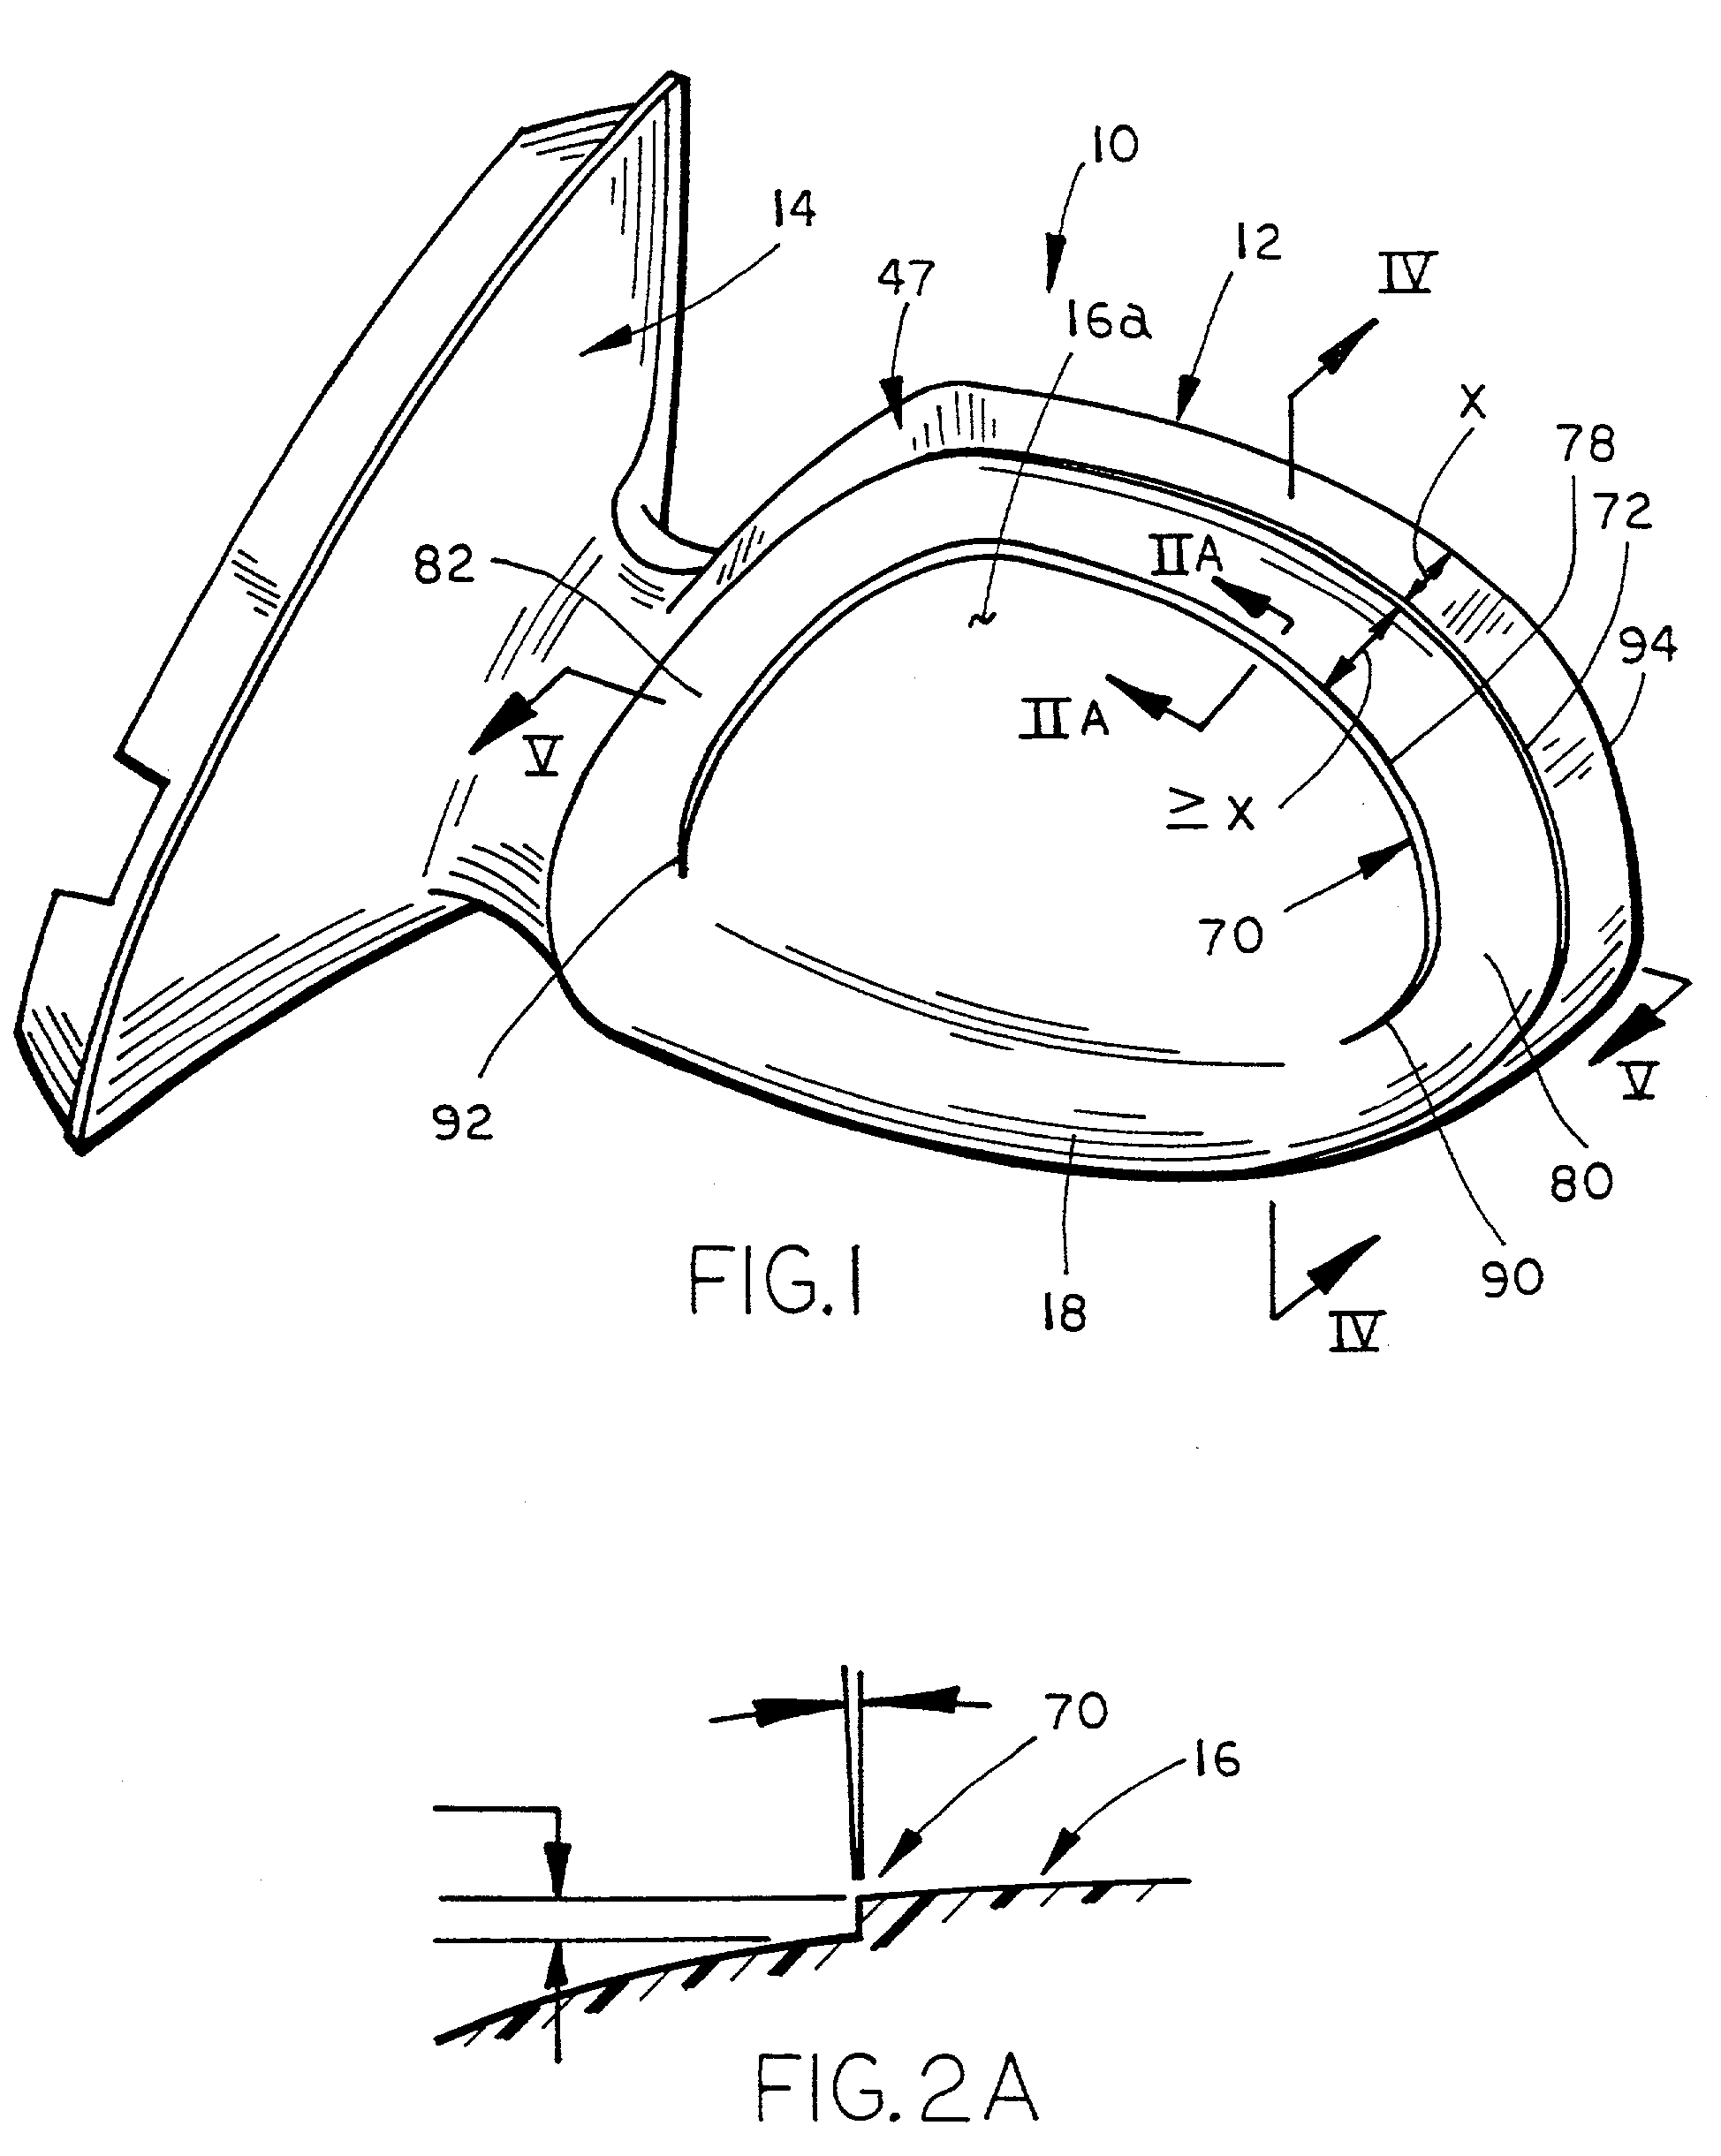 Outside sideview mirror assembly with reduced wind noise